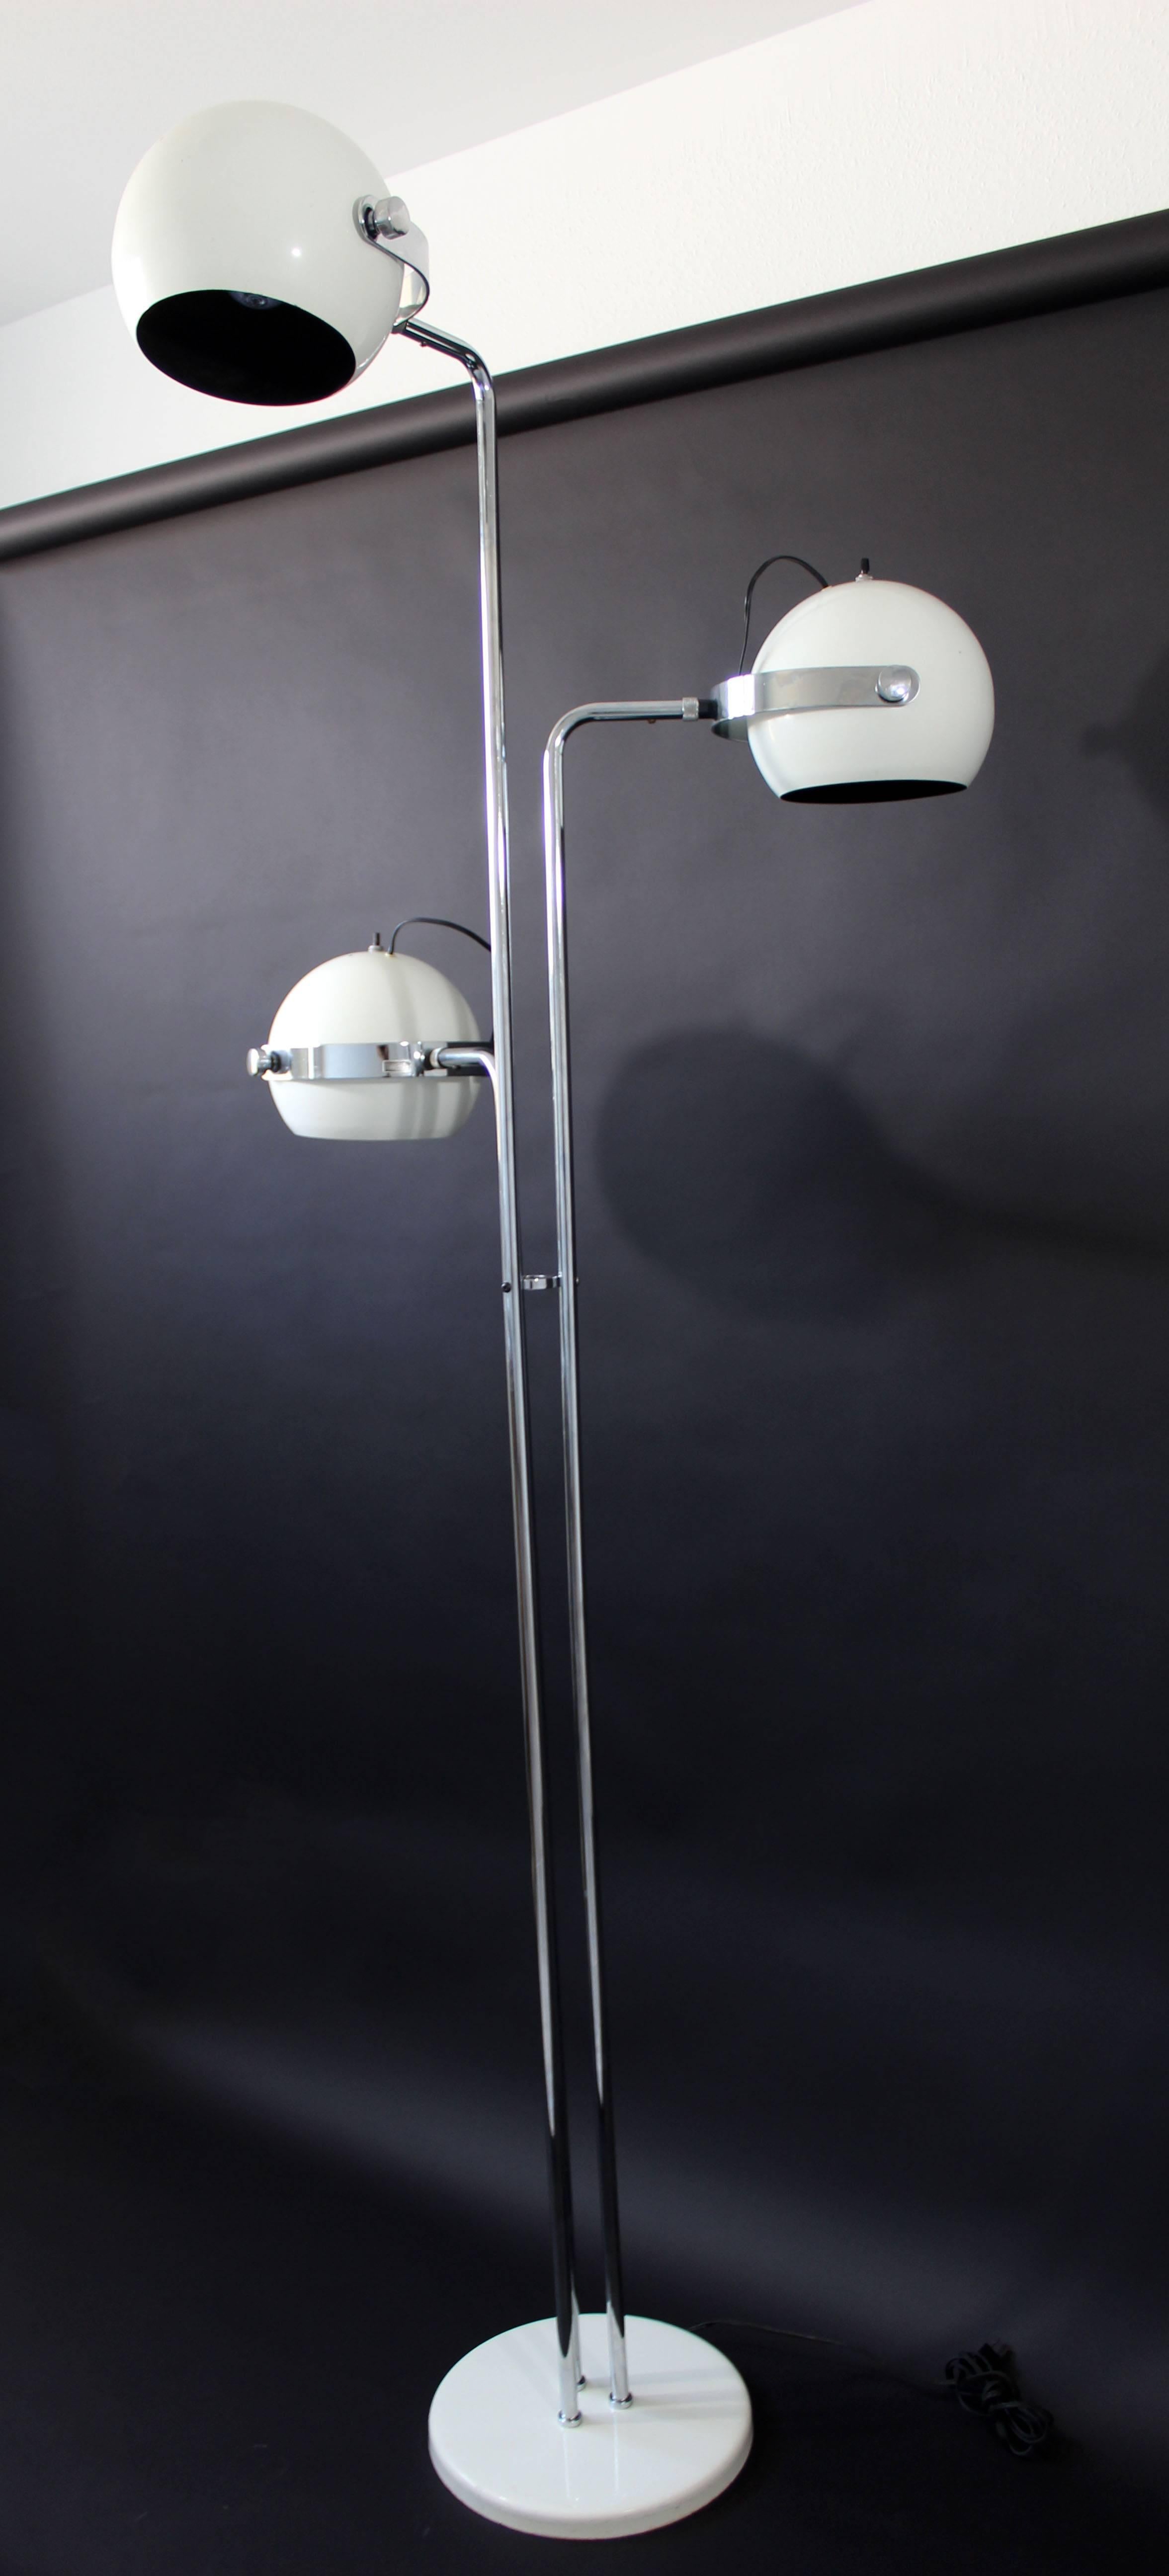 For your consideration is a rare and stunning beauty of a three-bulb floor lamp, made of chrome, partially covered in white enamel, by Robert Sonneman, circa the 1970s. In excellent condition. The dimensions are 27